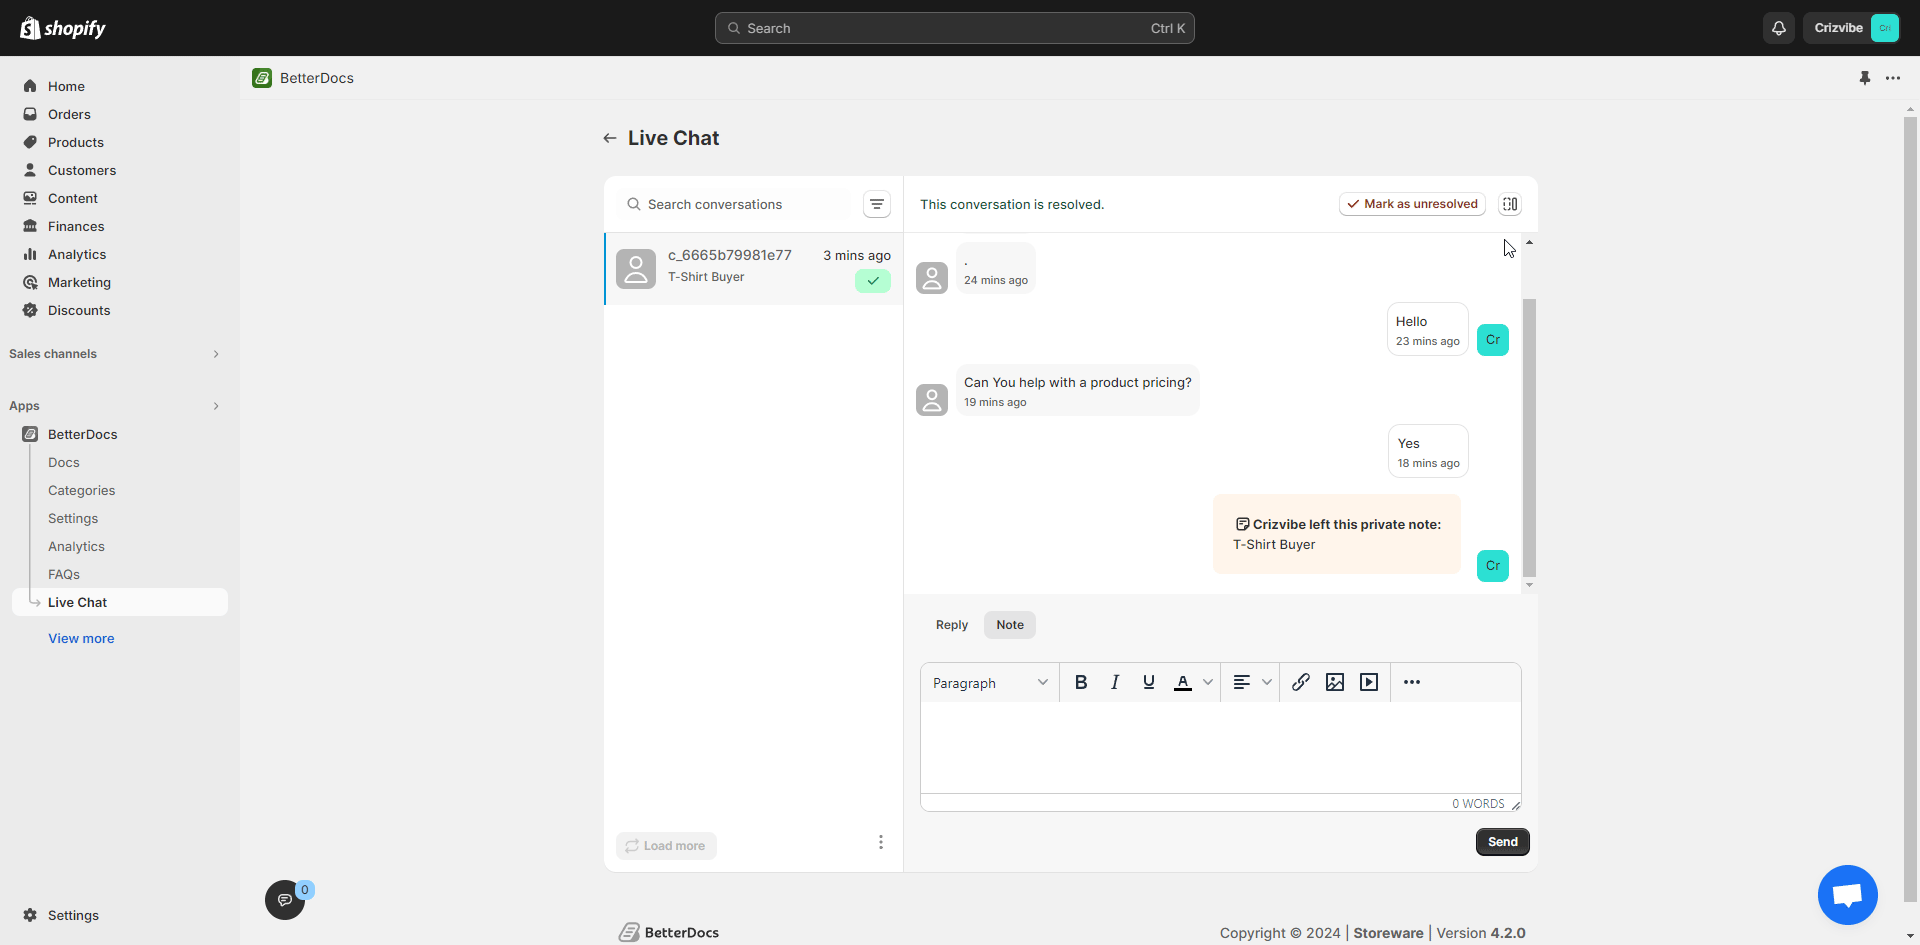 Configure Live Chat In BetterDocs For Shopify